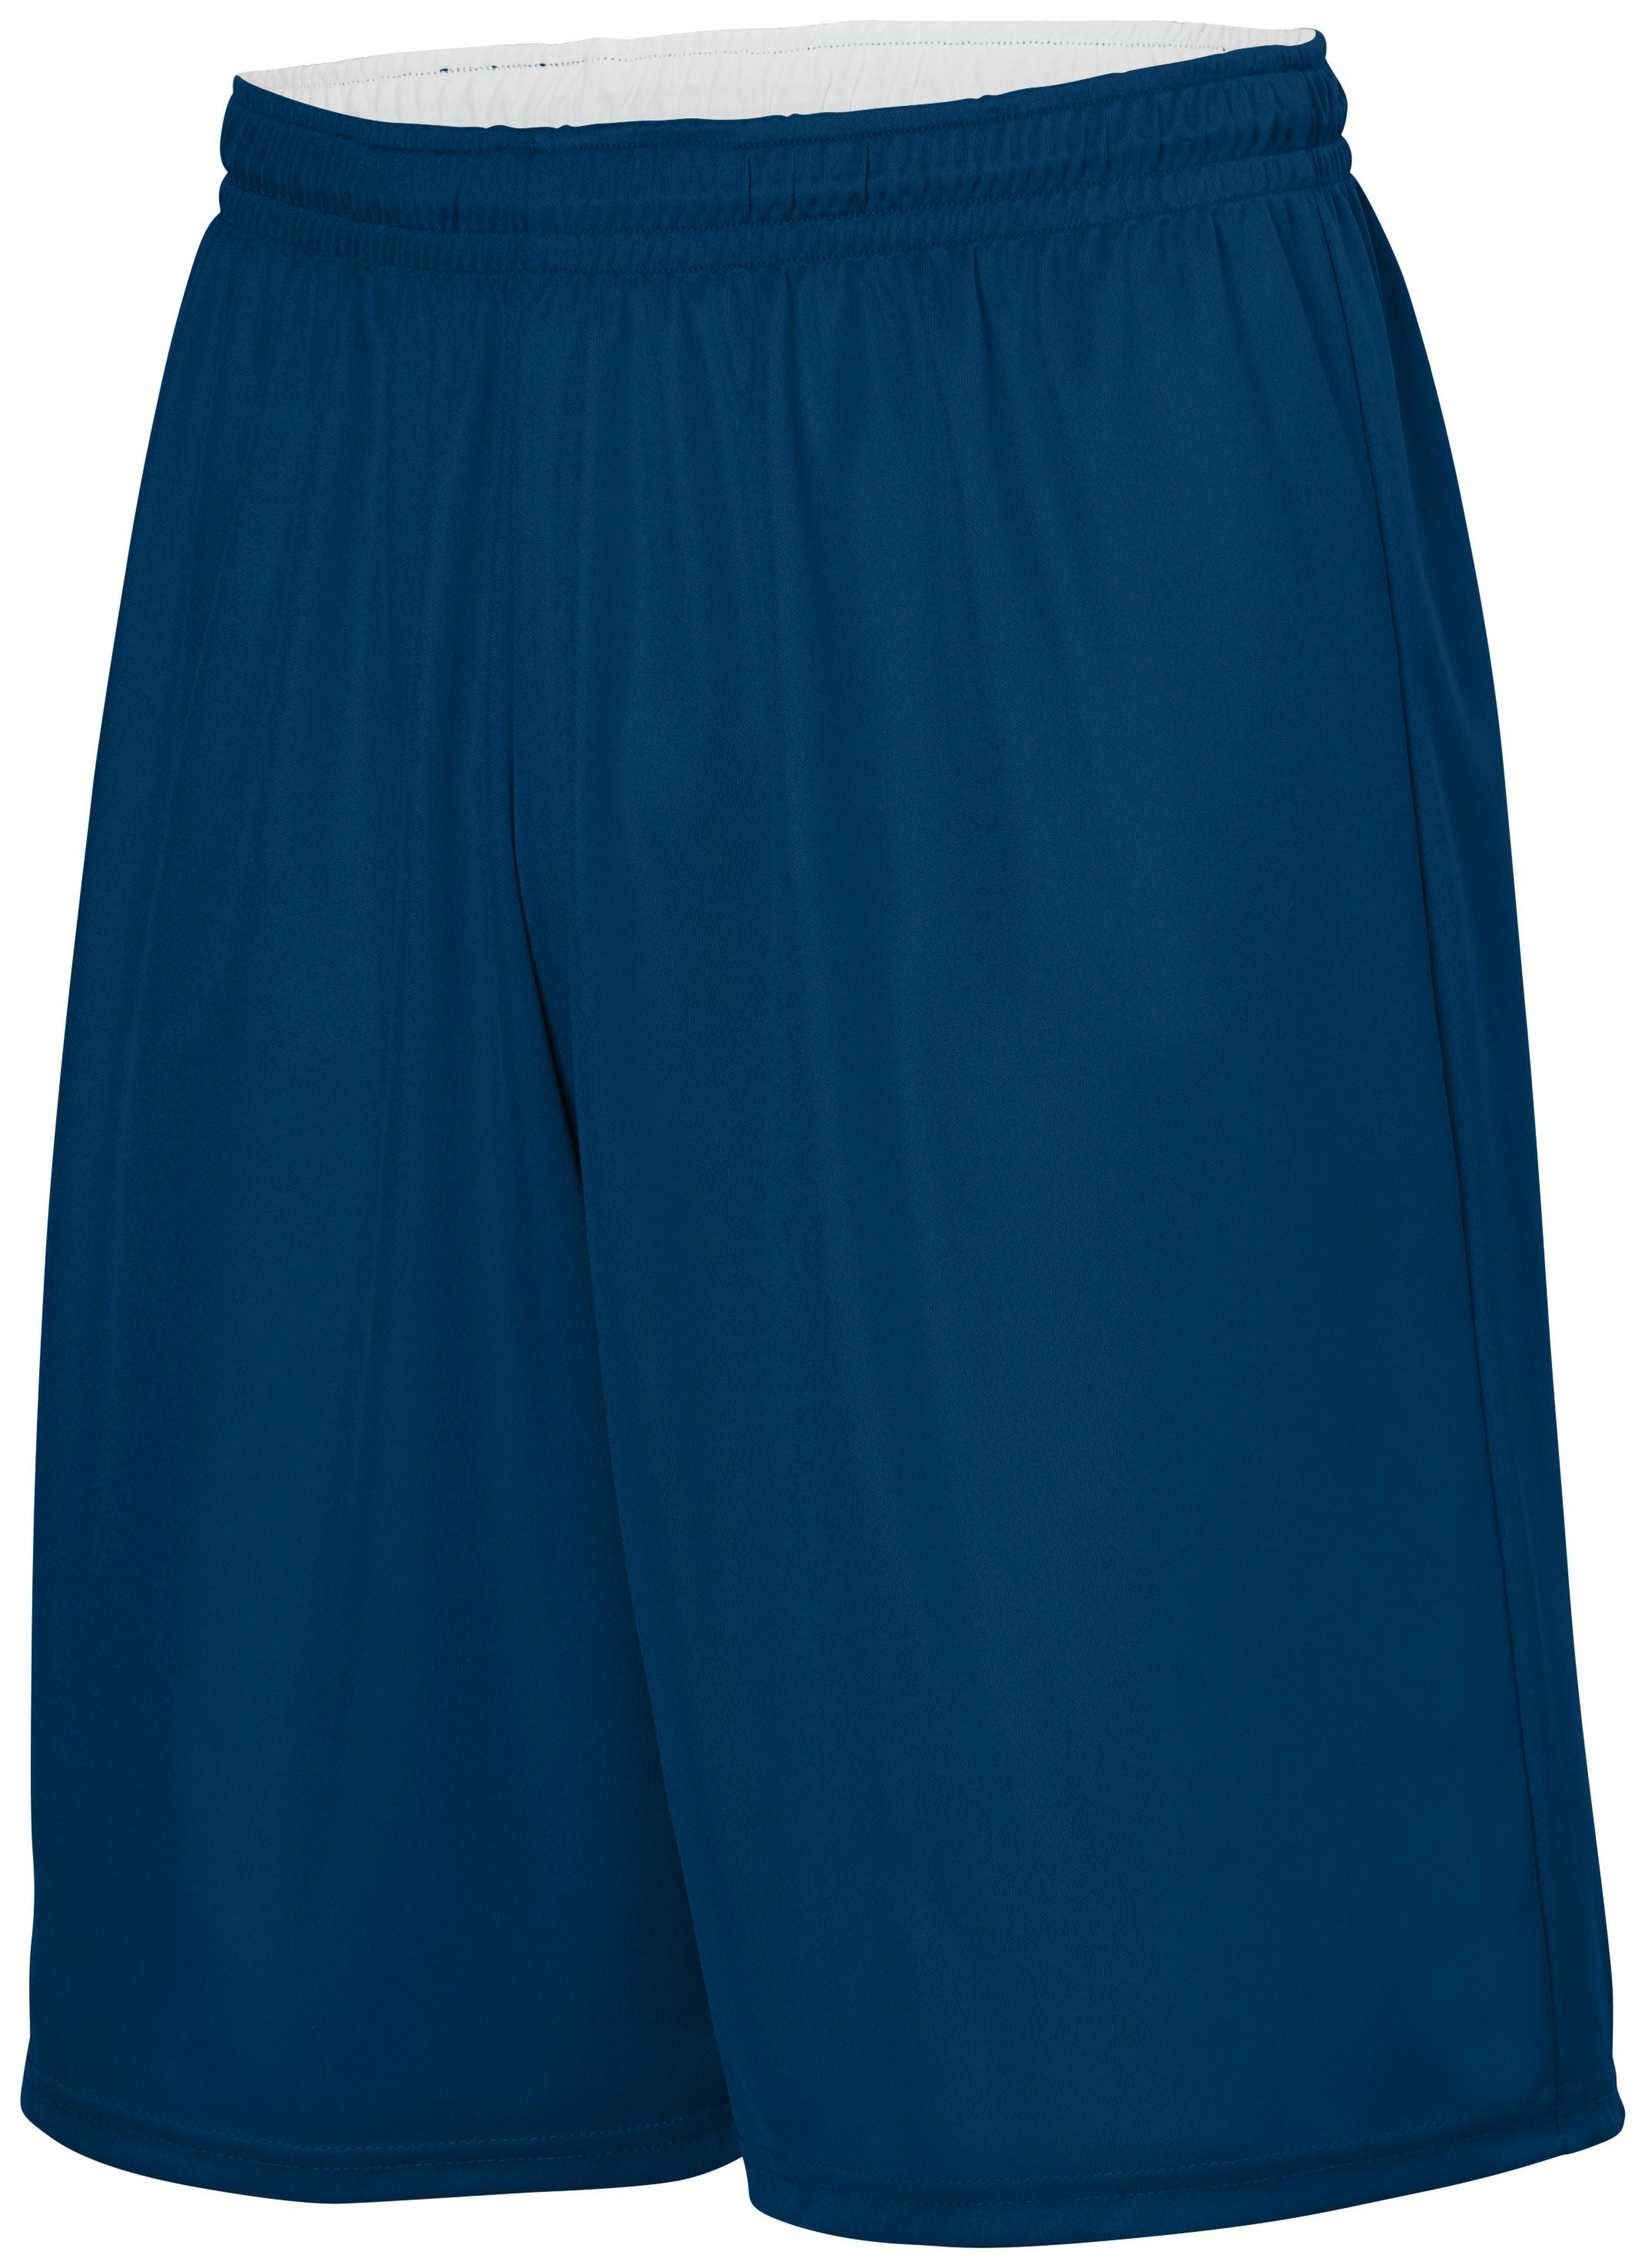 Augusta Sportswear Youth Reversible Wicking Shorts in Navy/White  -Part of the Youth, Youth-Shorts, Augusta-Products, Basketball, All-Sports, All-Sports-1 product lines at KanaleyCreations.com